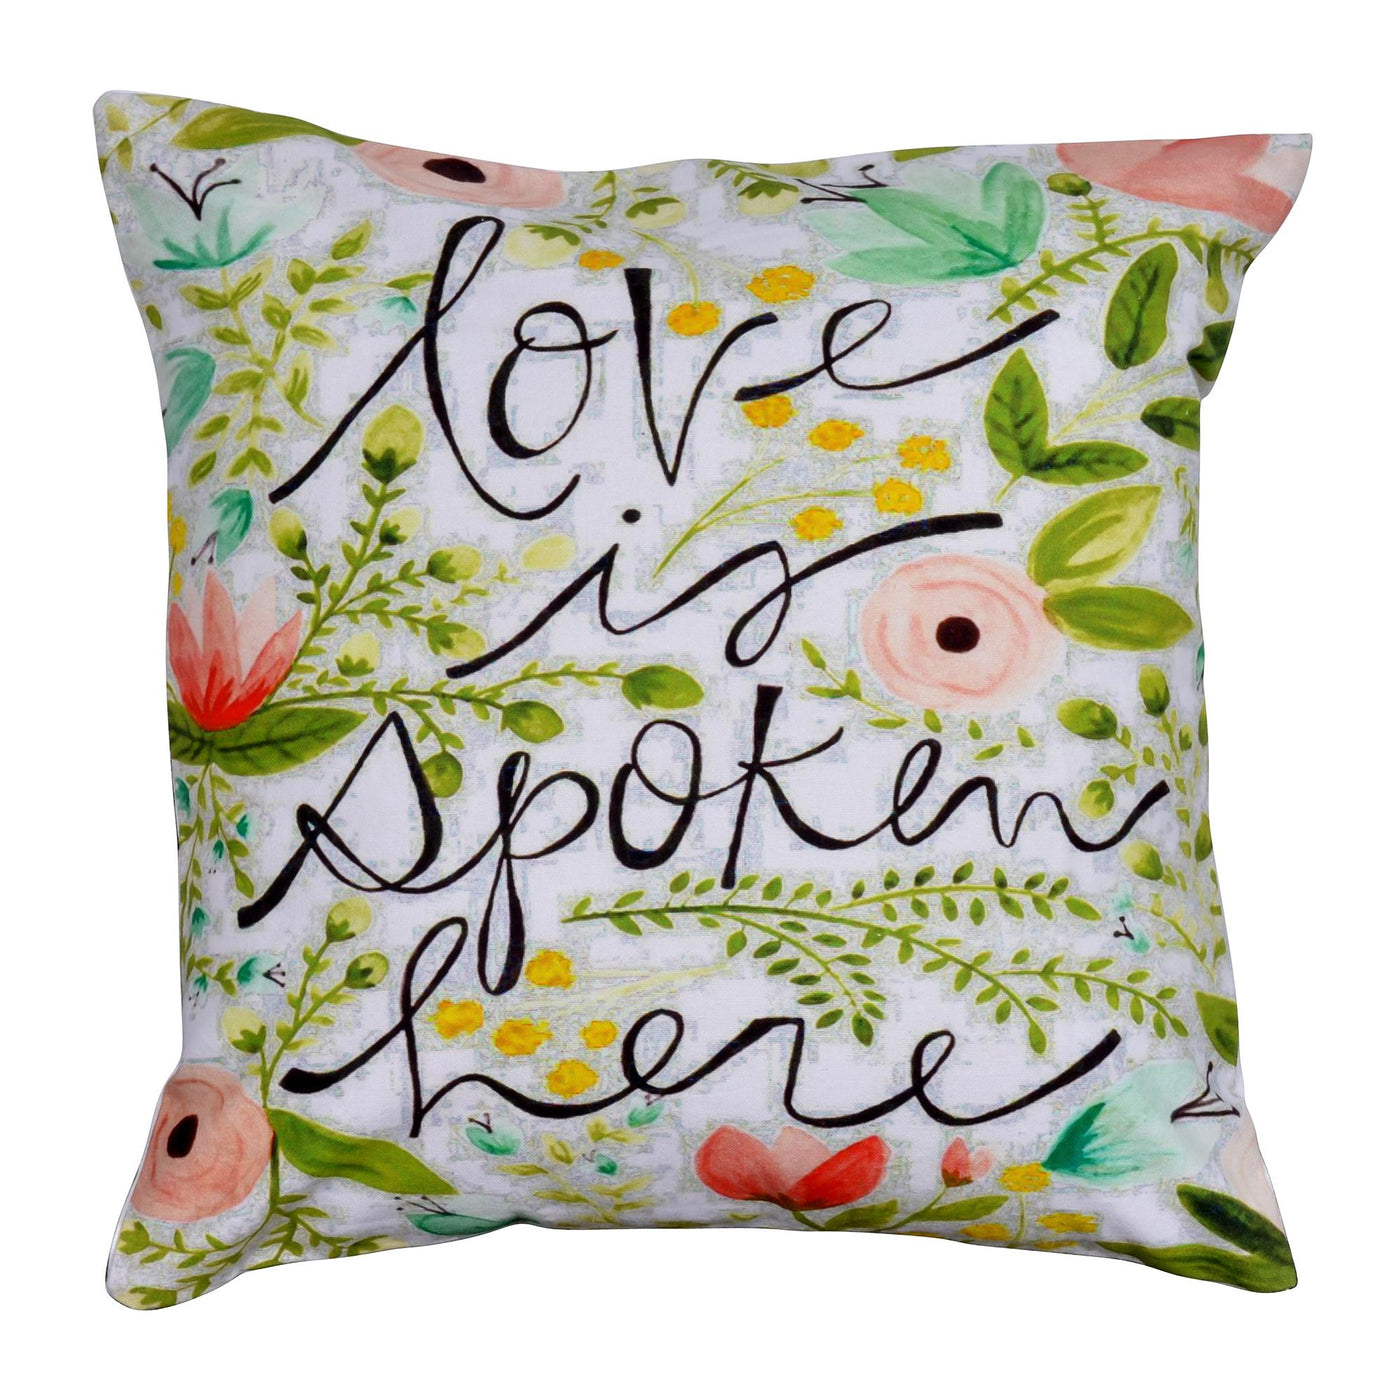 Love is spoken here 16 Cushion Cover